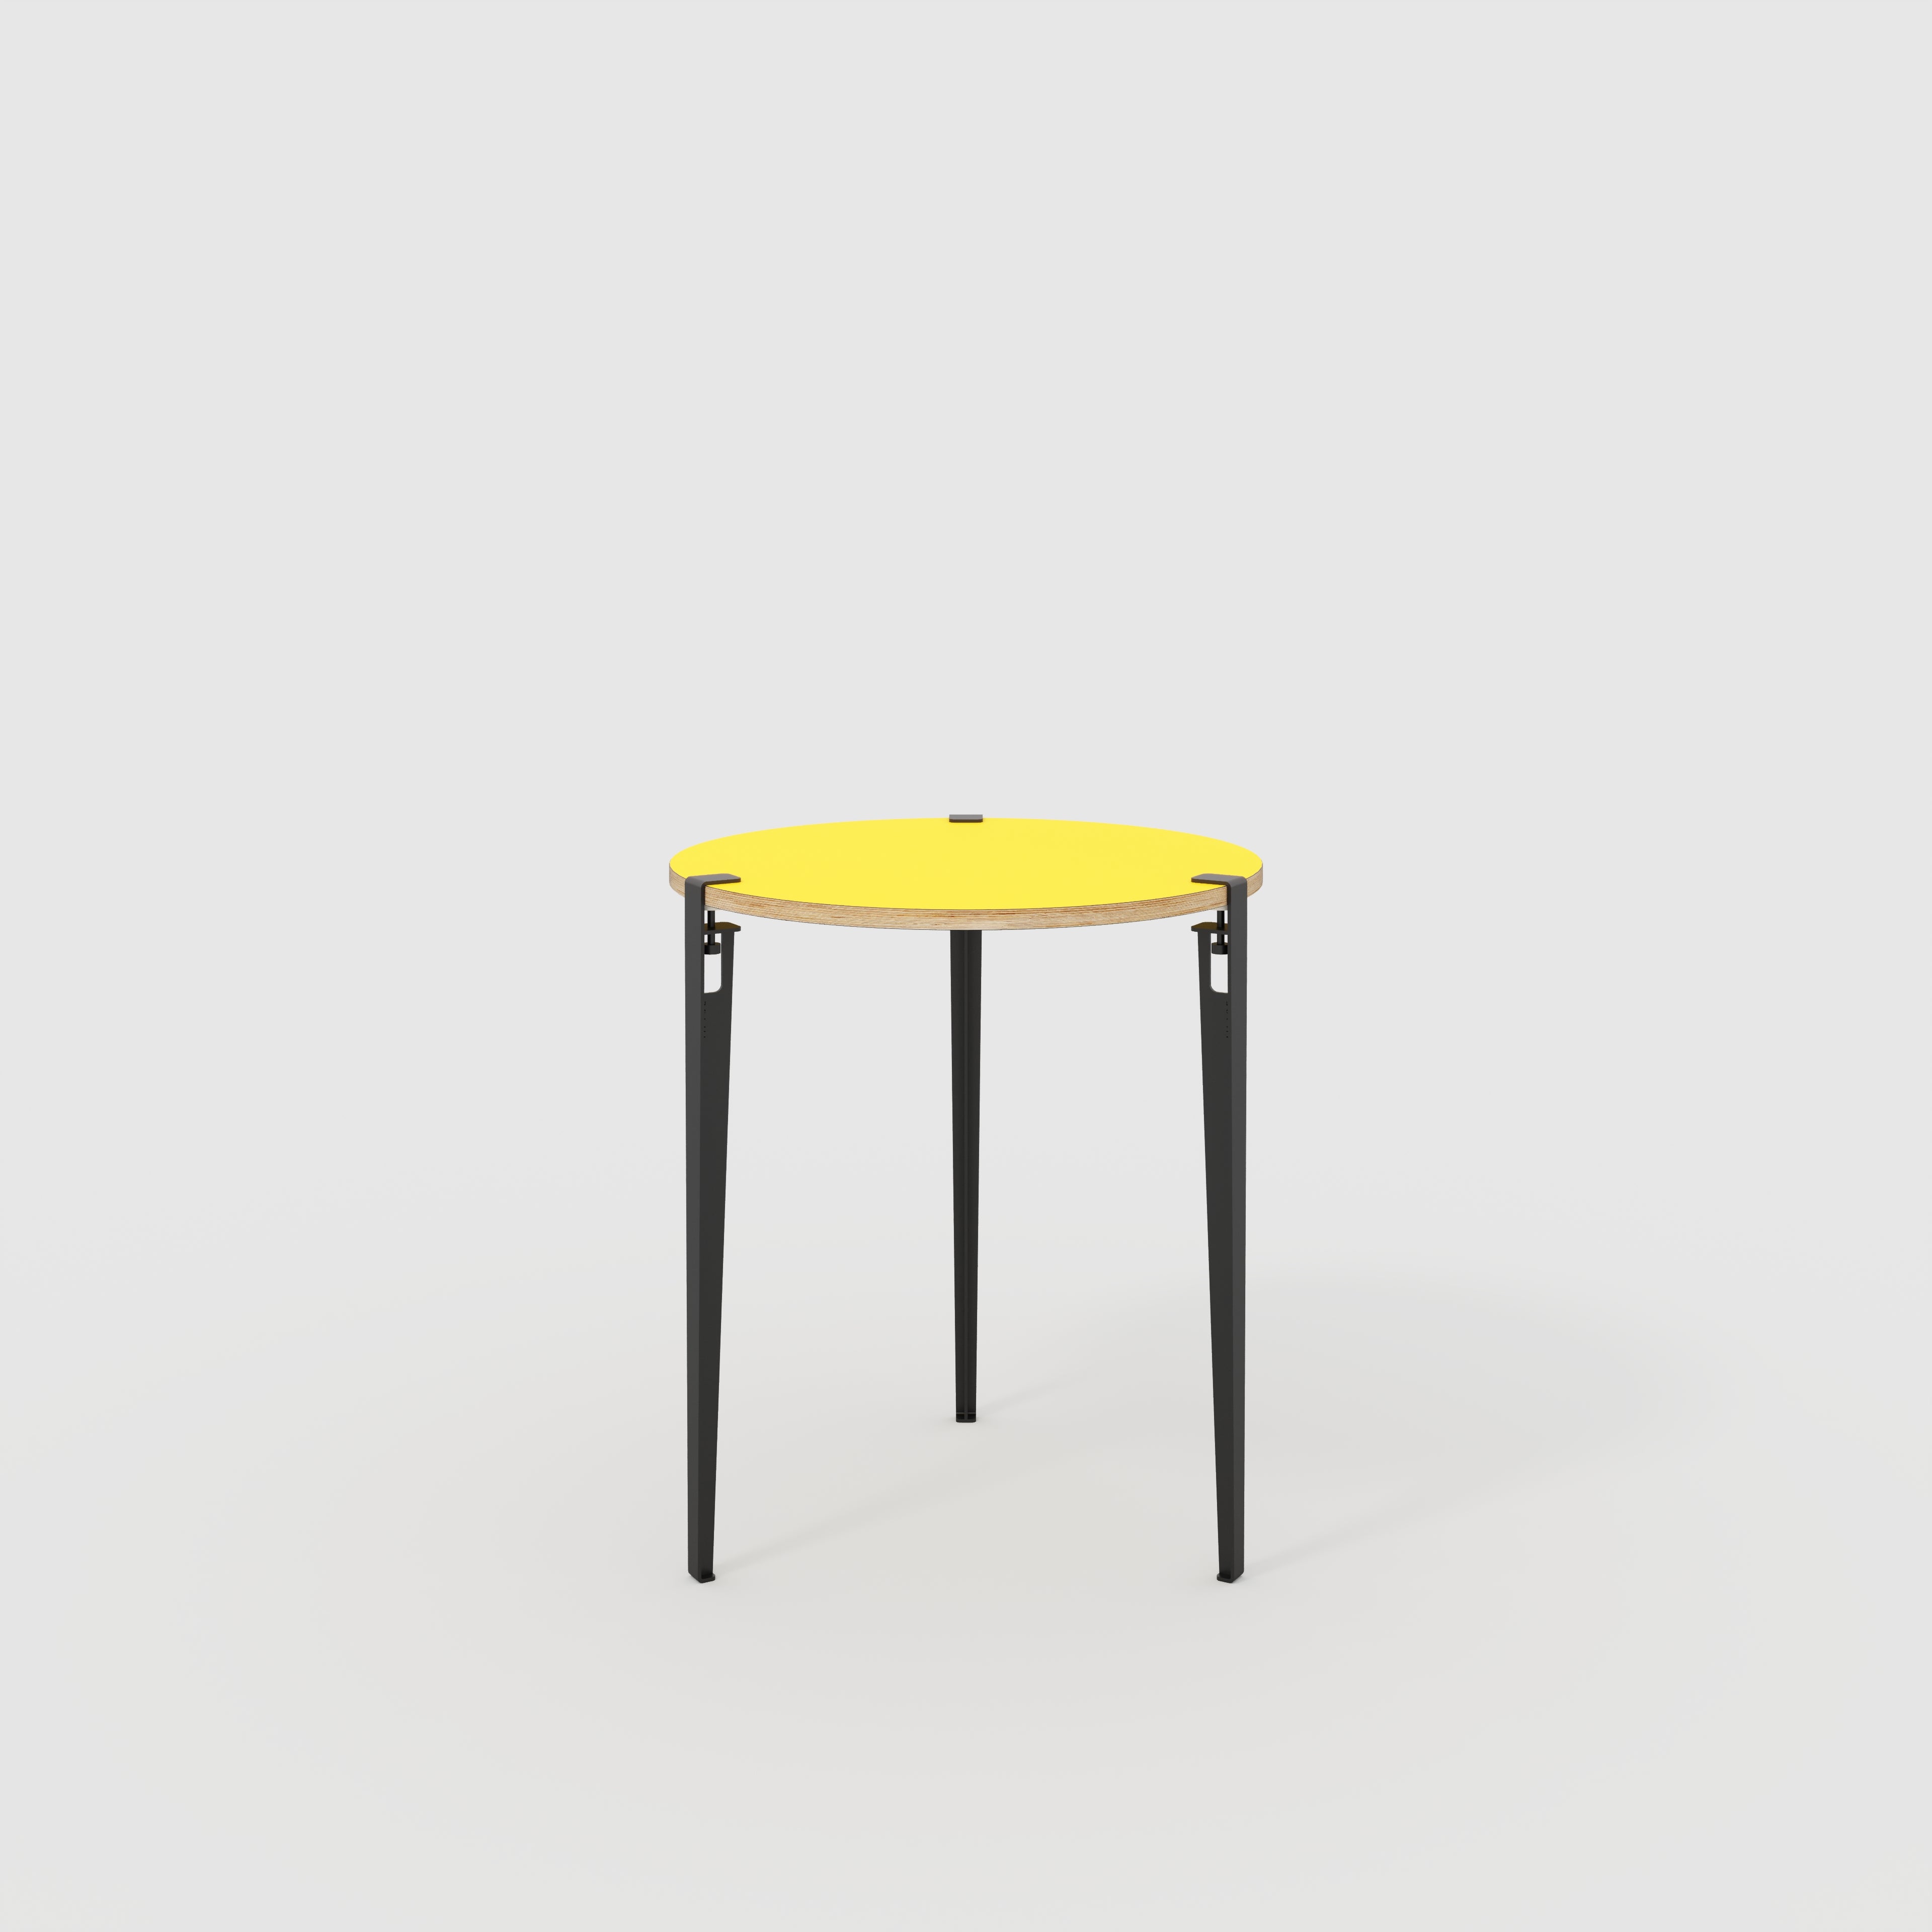 Round Table with Black Tiptoe Legs - Formica Chrome Yellow - 800(dia) x 900(h)